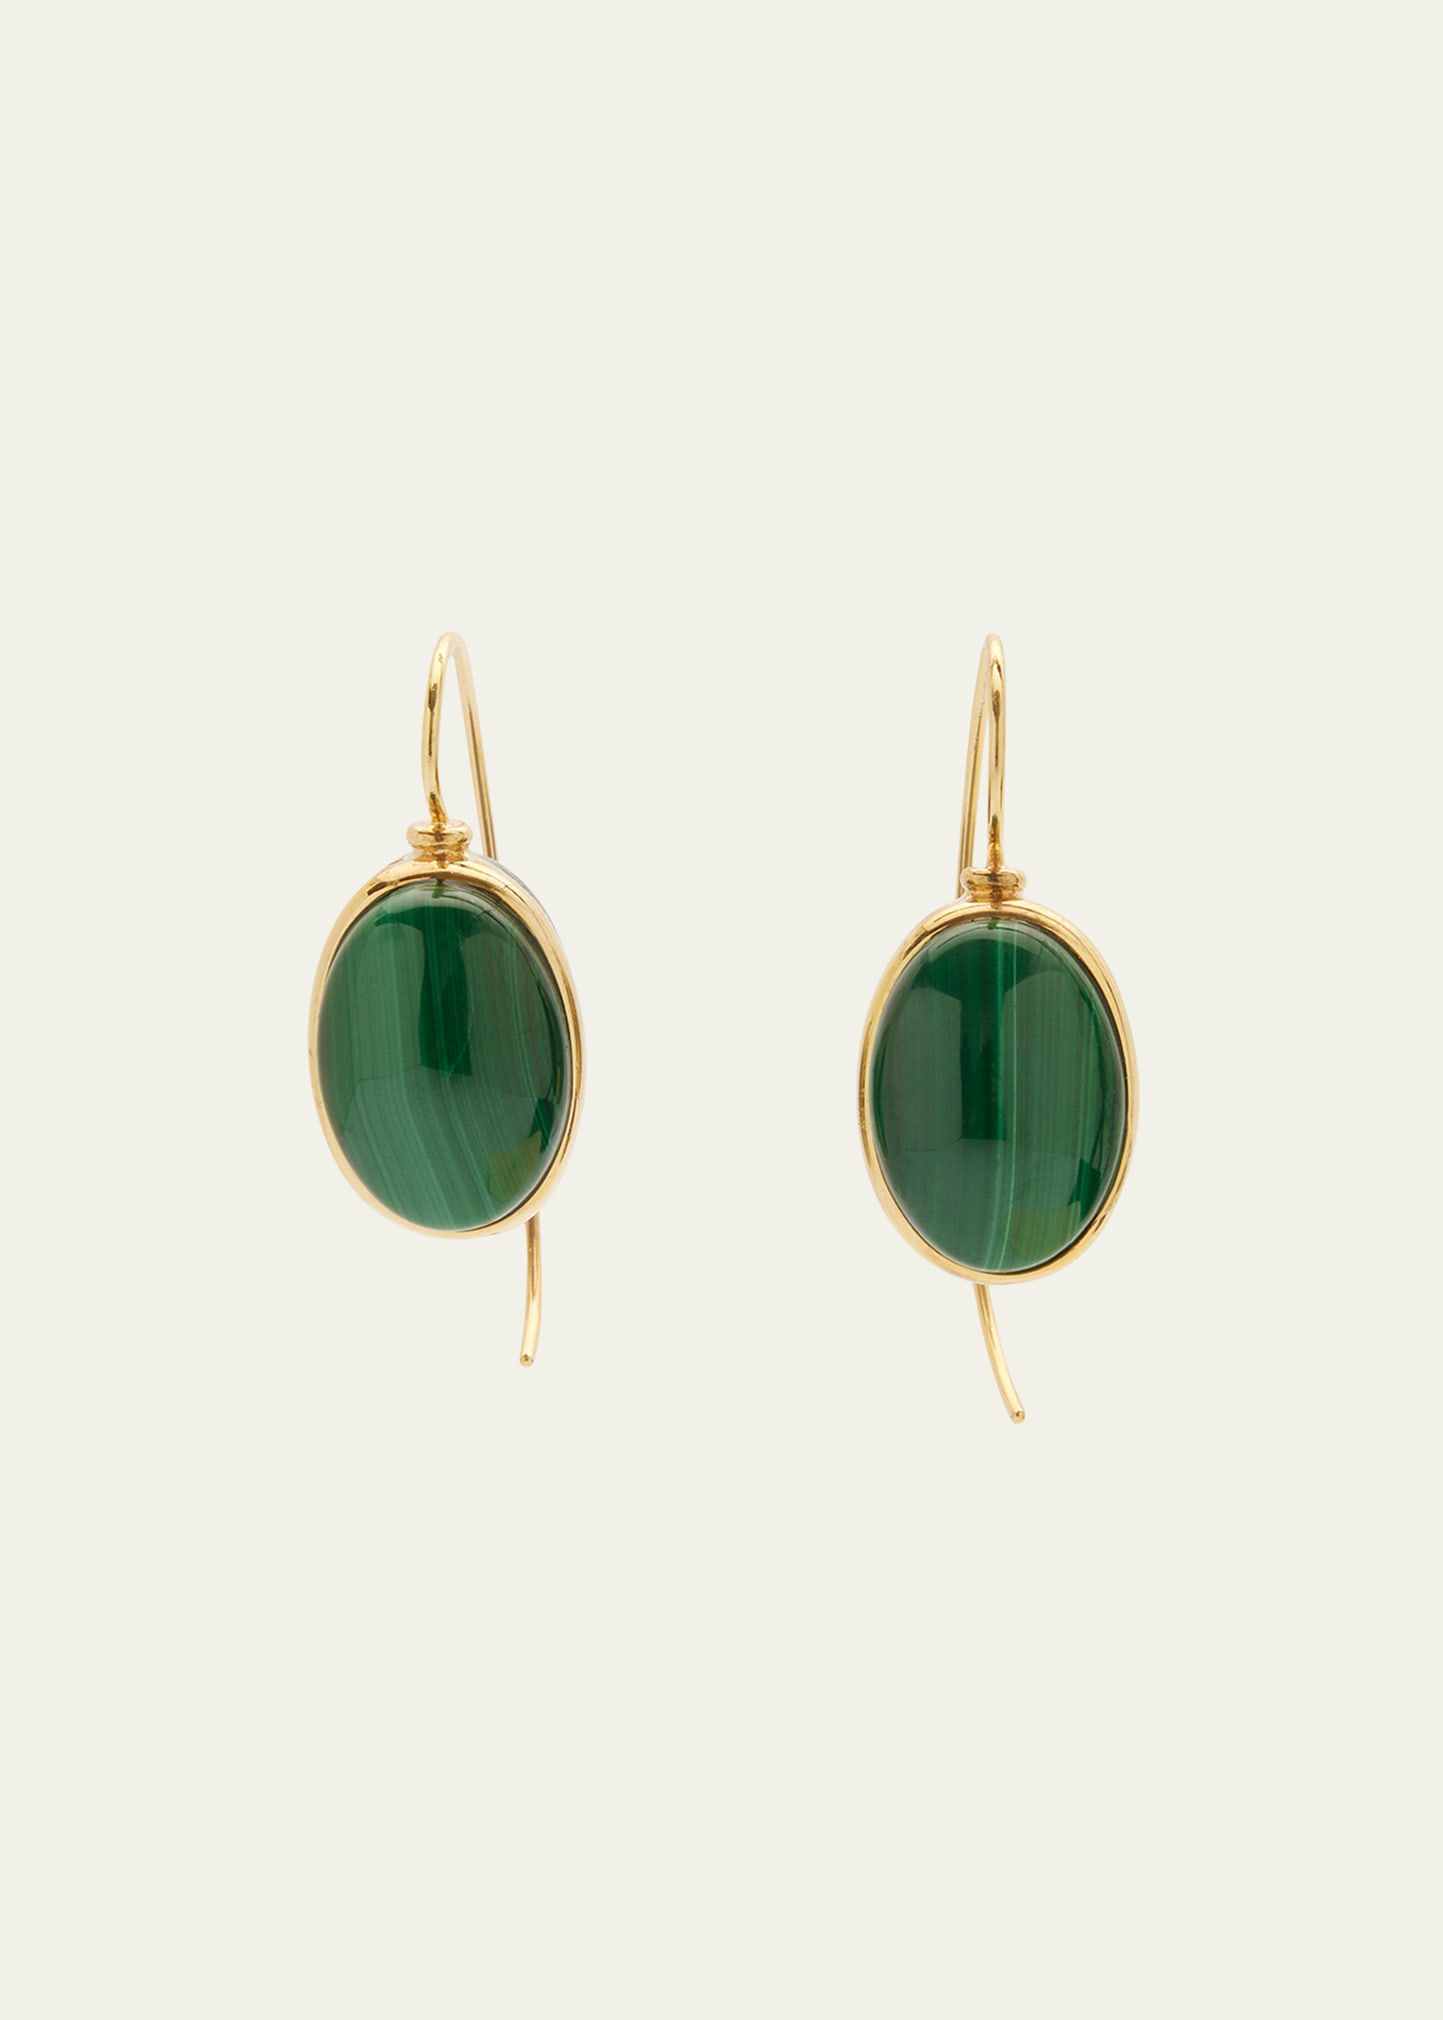 Grazia And Marica Vozza 18k Yellow Gold Hook Earrings With Malachite In Yg